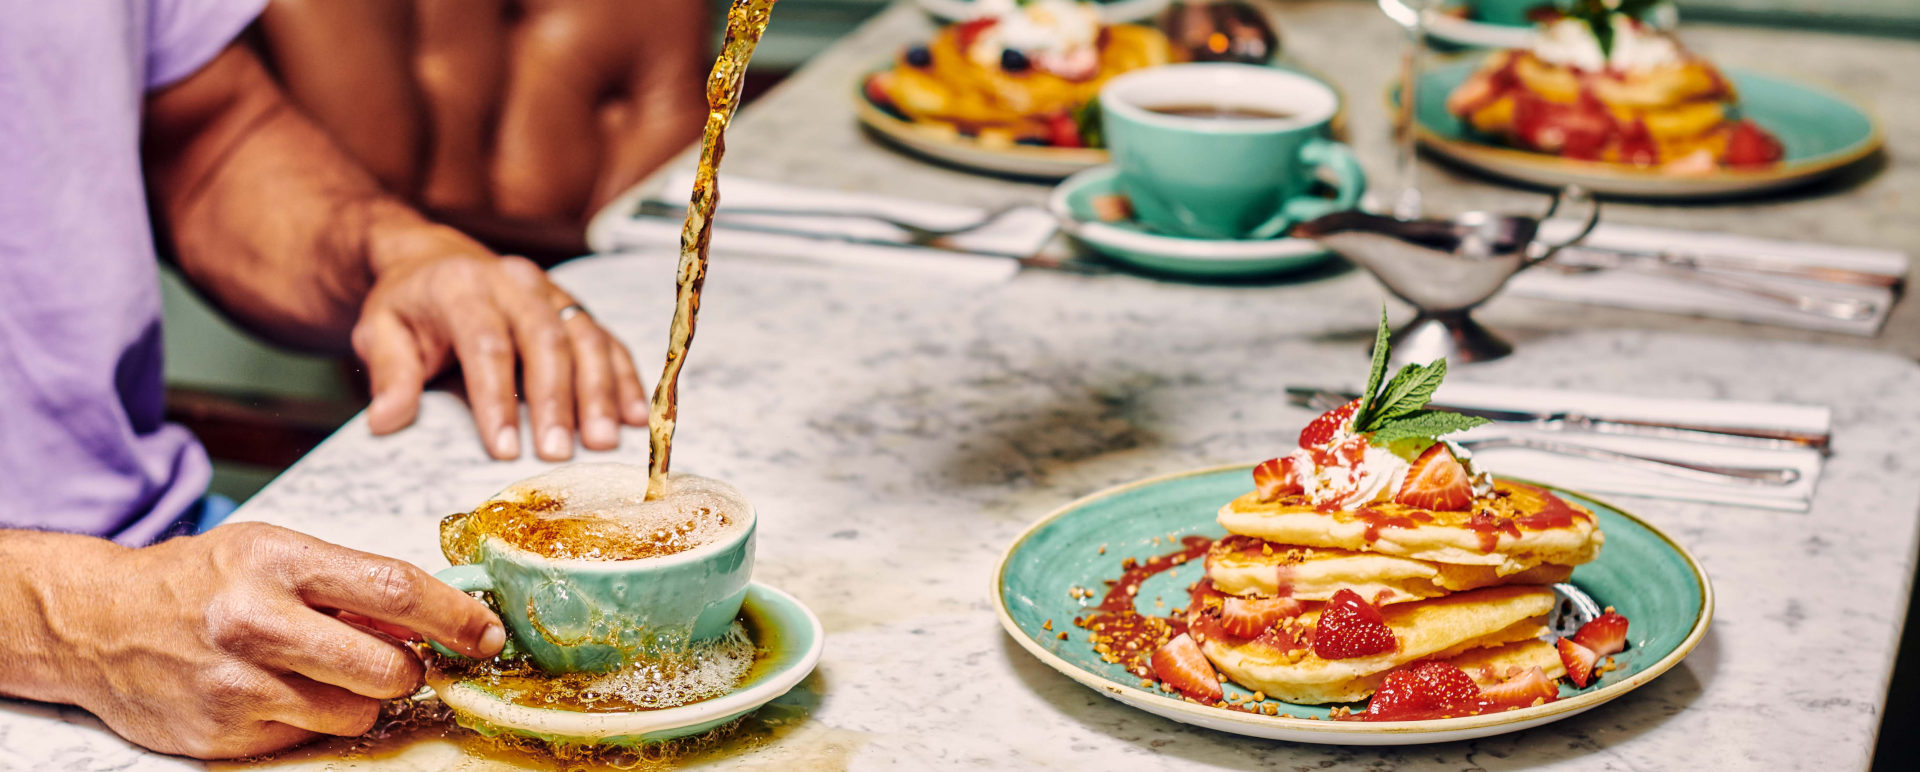 table set with green plates with pancakes drizzled in sauce and with strawberries. Someone is pouring tea from a red teapot into a teacup which is overflowing.